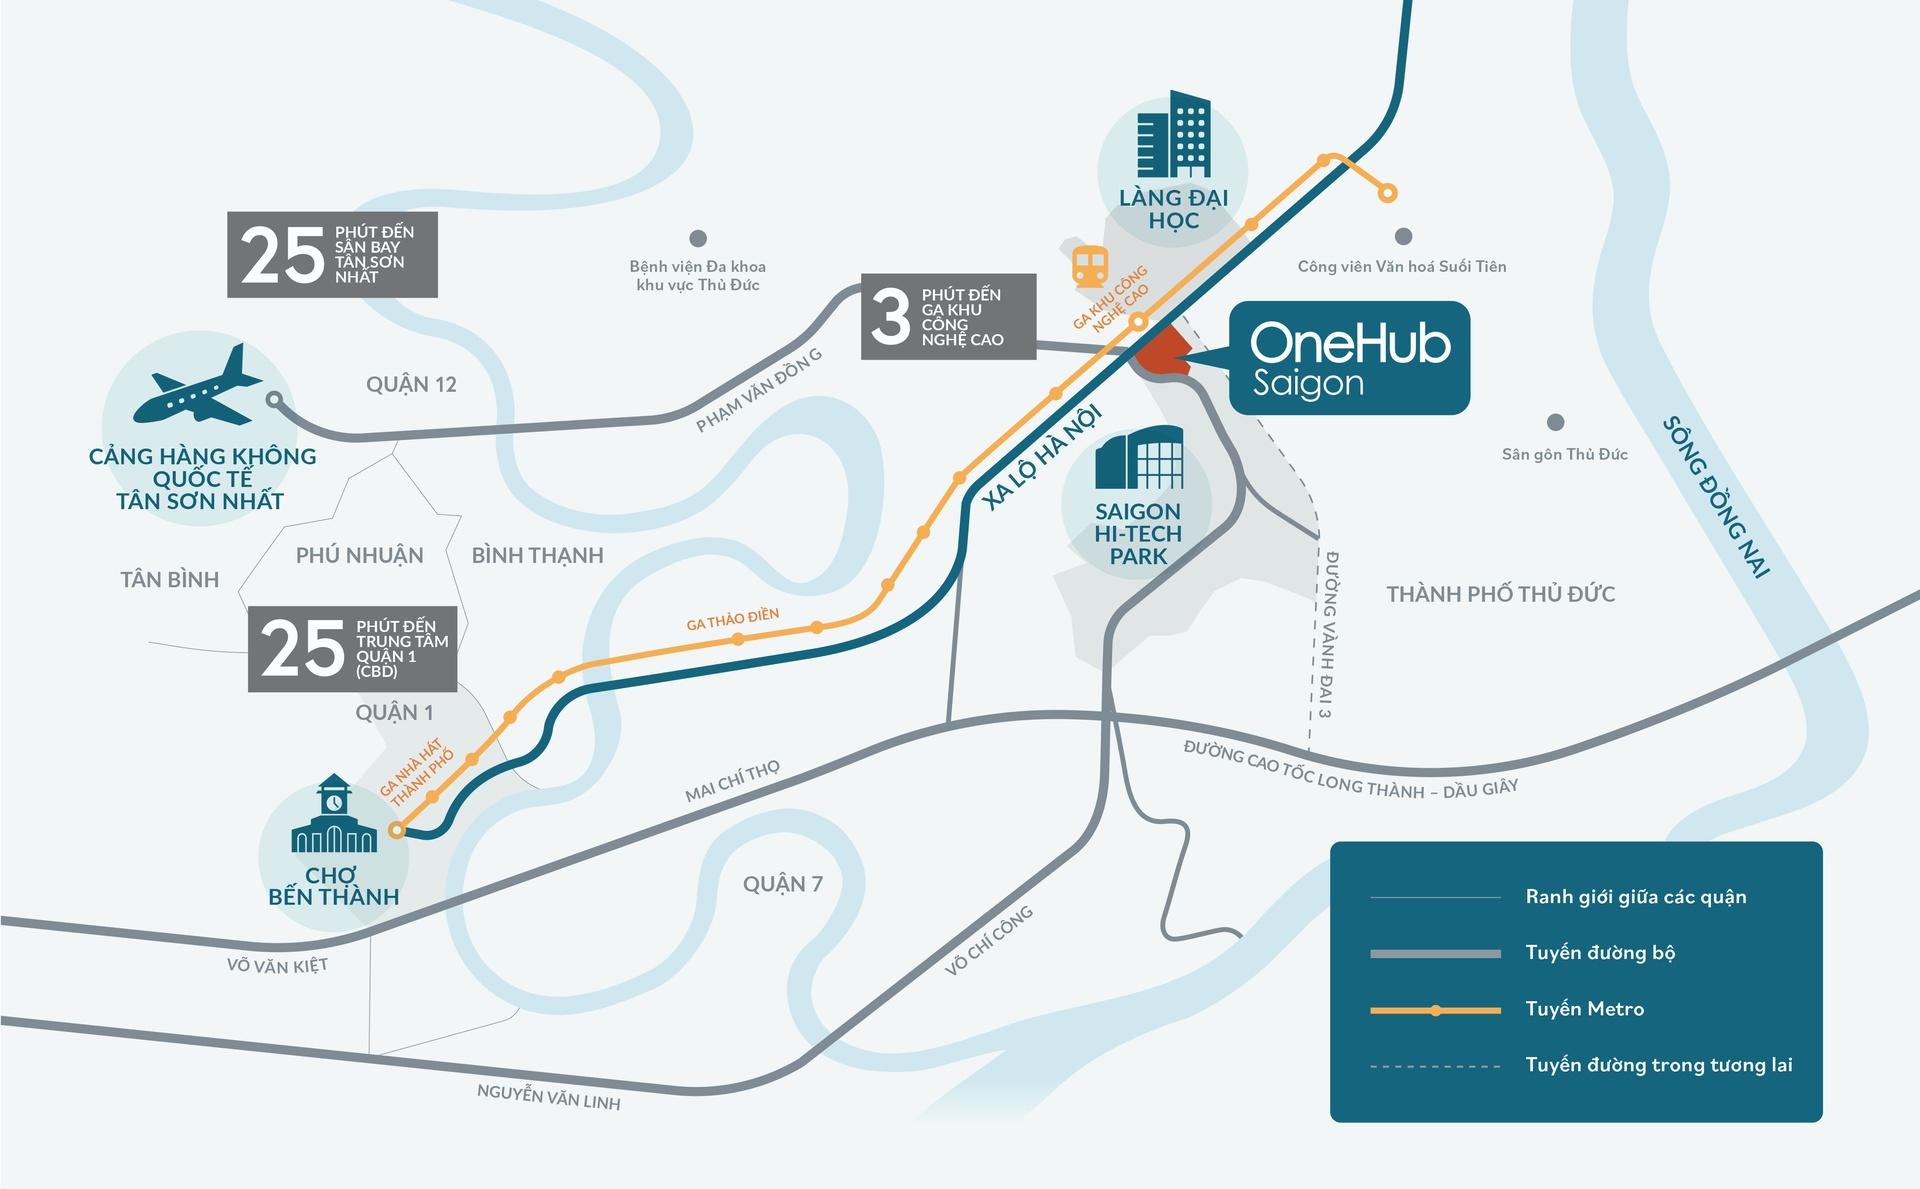 The prime location and extremely convenient traffic connectivity of the OneHub Saigon project